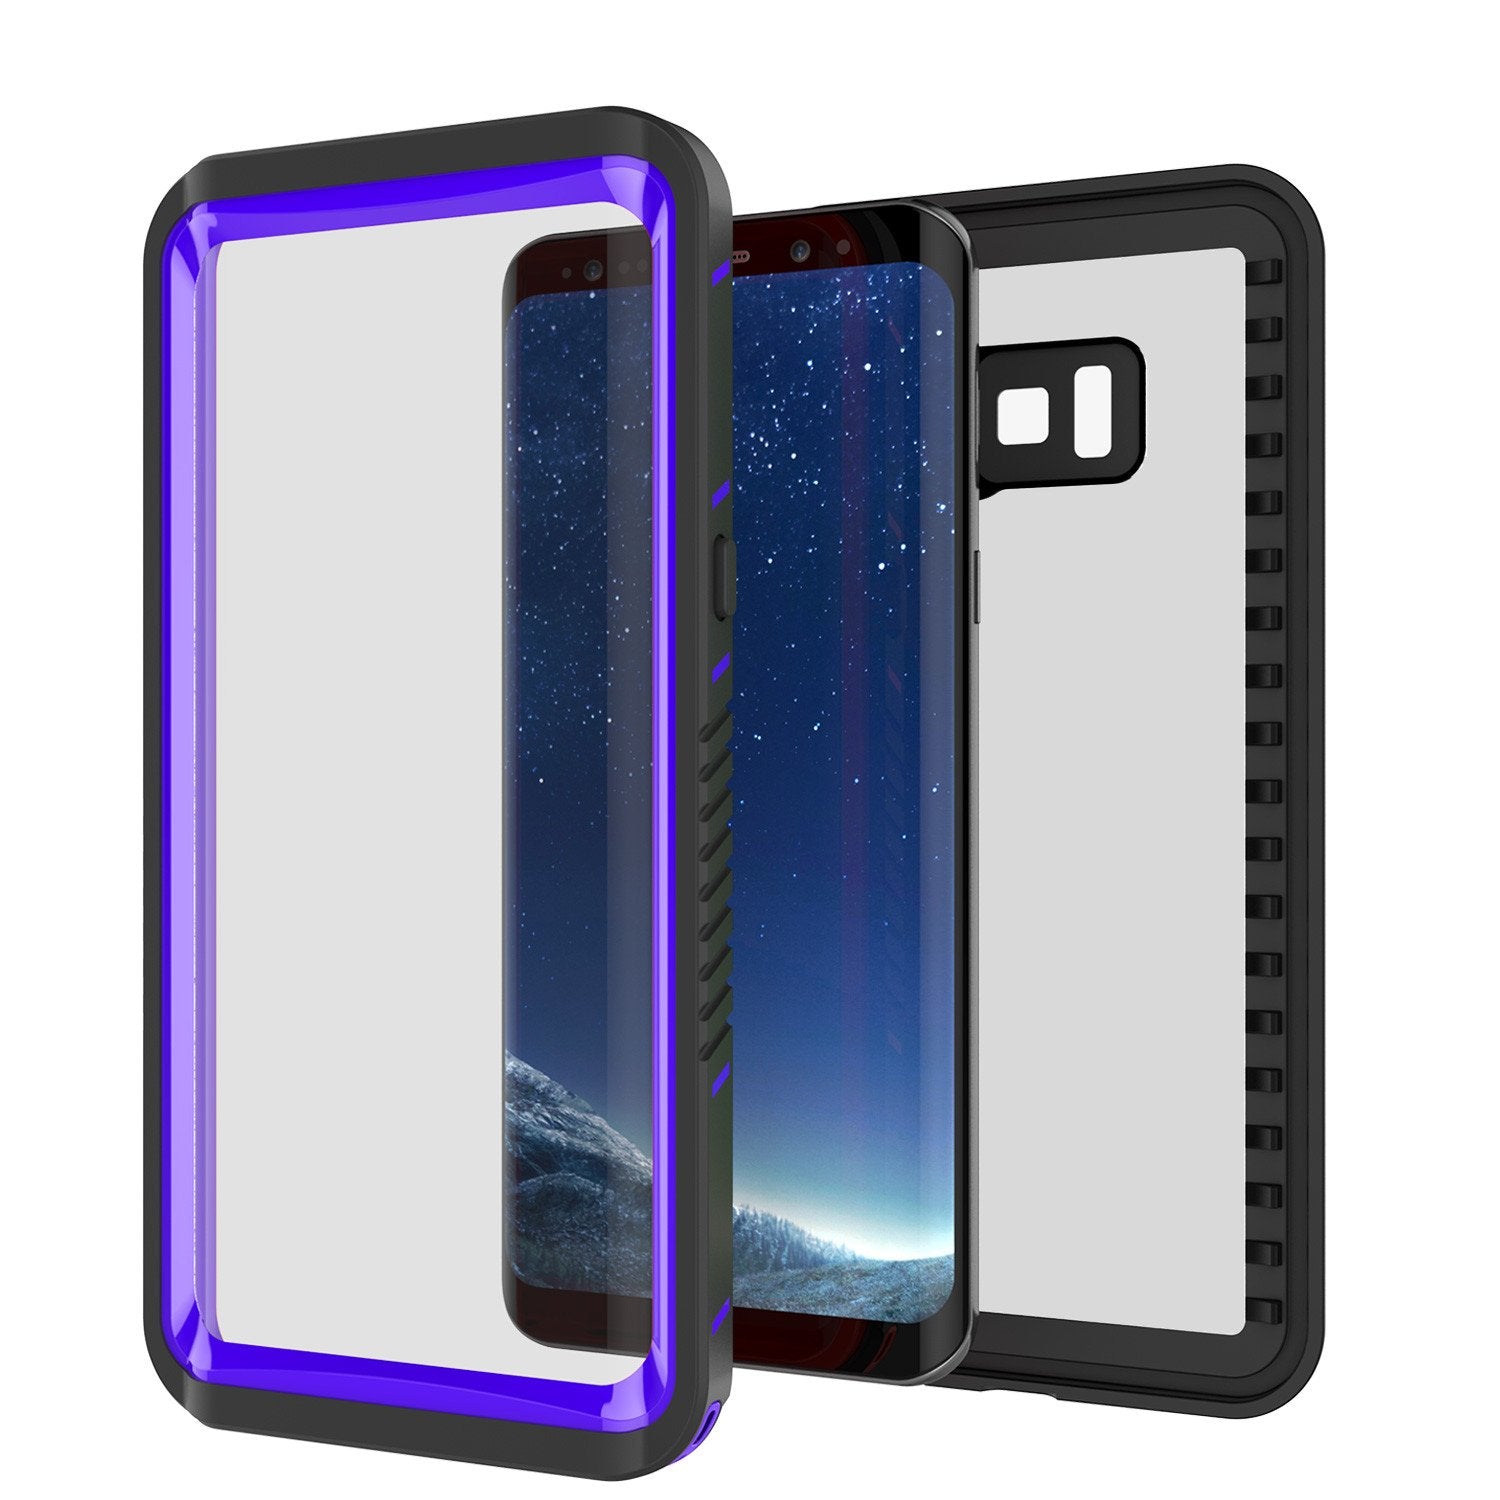 Galaxy S8 PLUS Waterproof Case, Punkcase [Extreme Series] Slim Fit, Armor Cover W/ Built In Screen Protector for Samsung Galaxy S8+ [Purple]